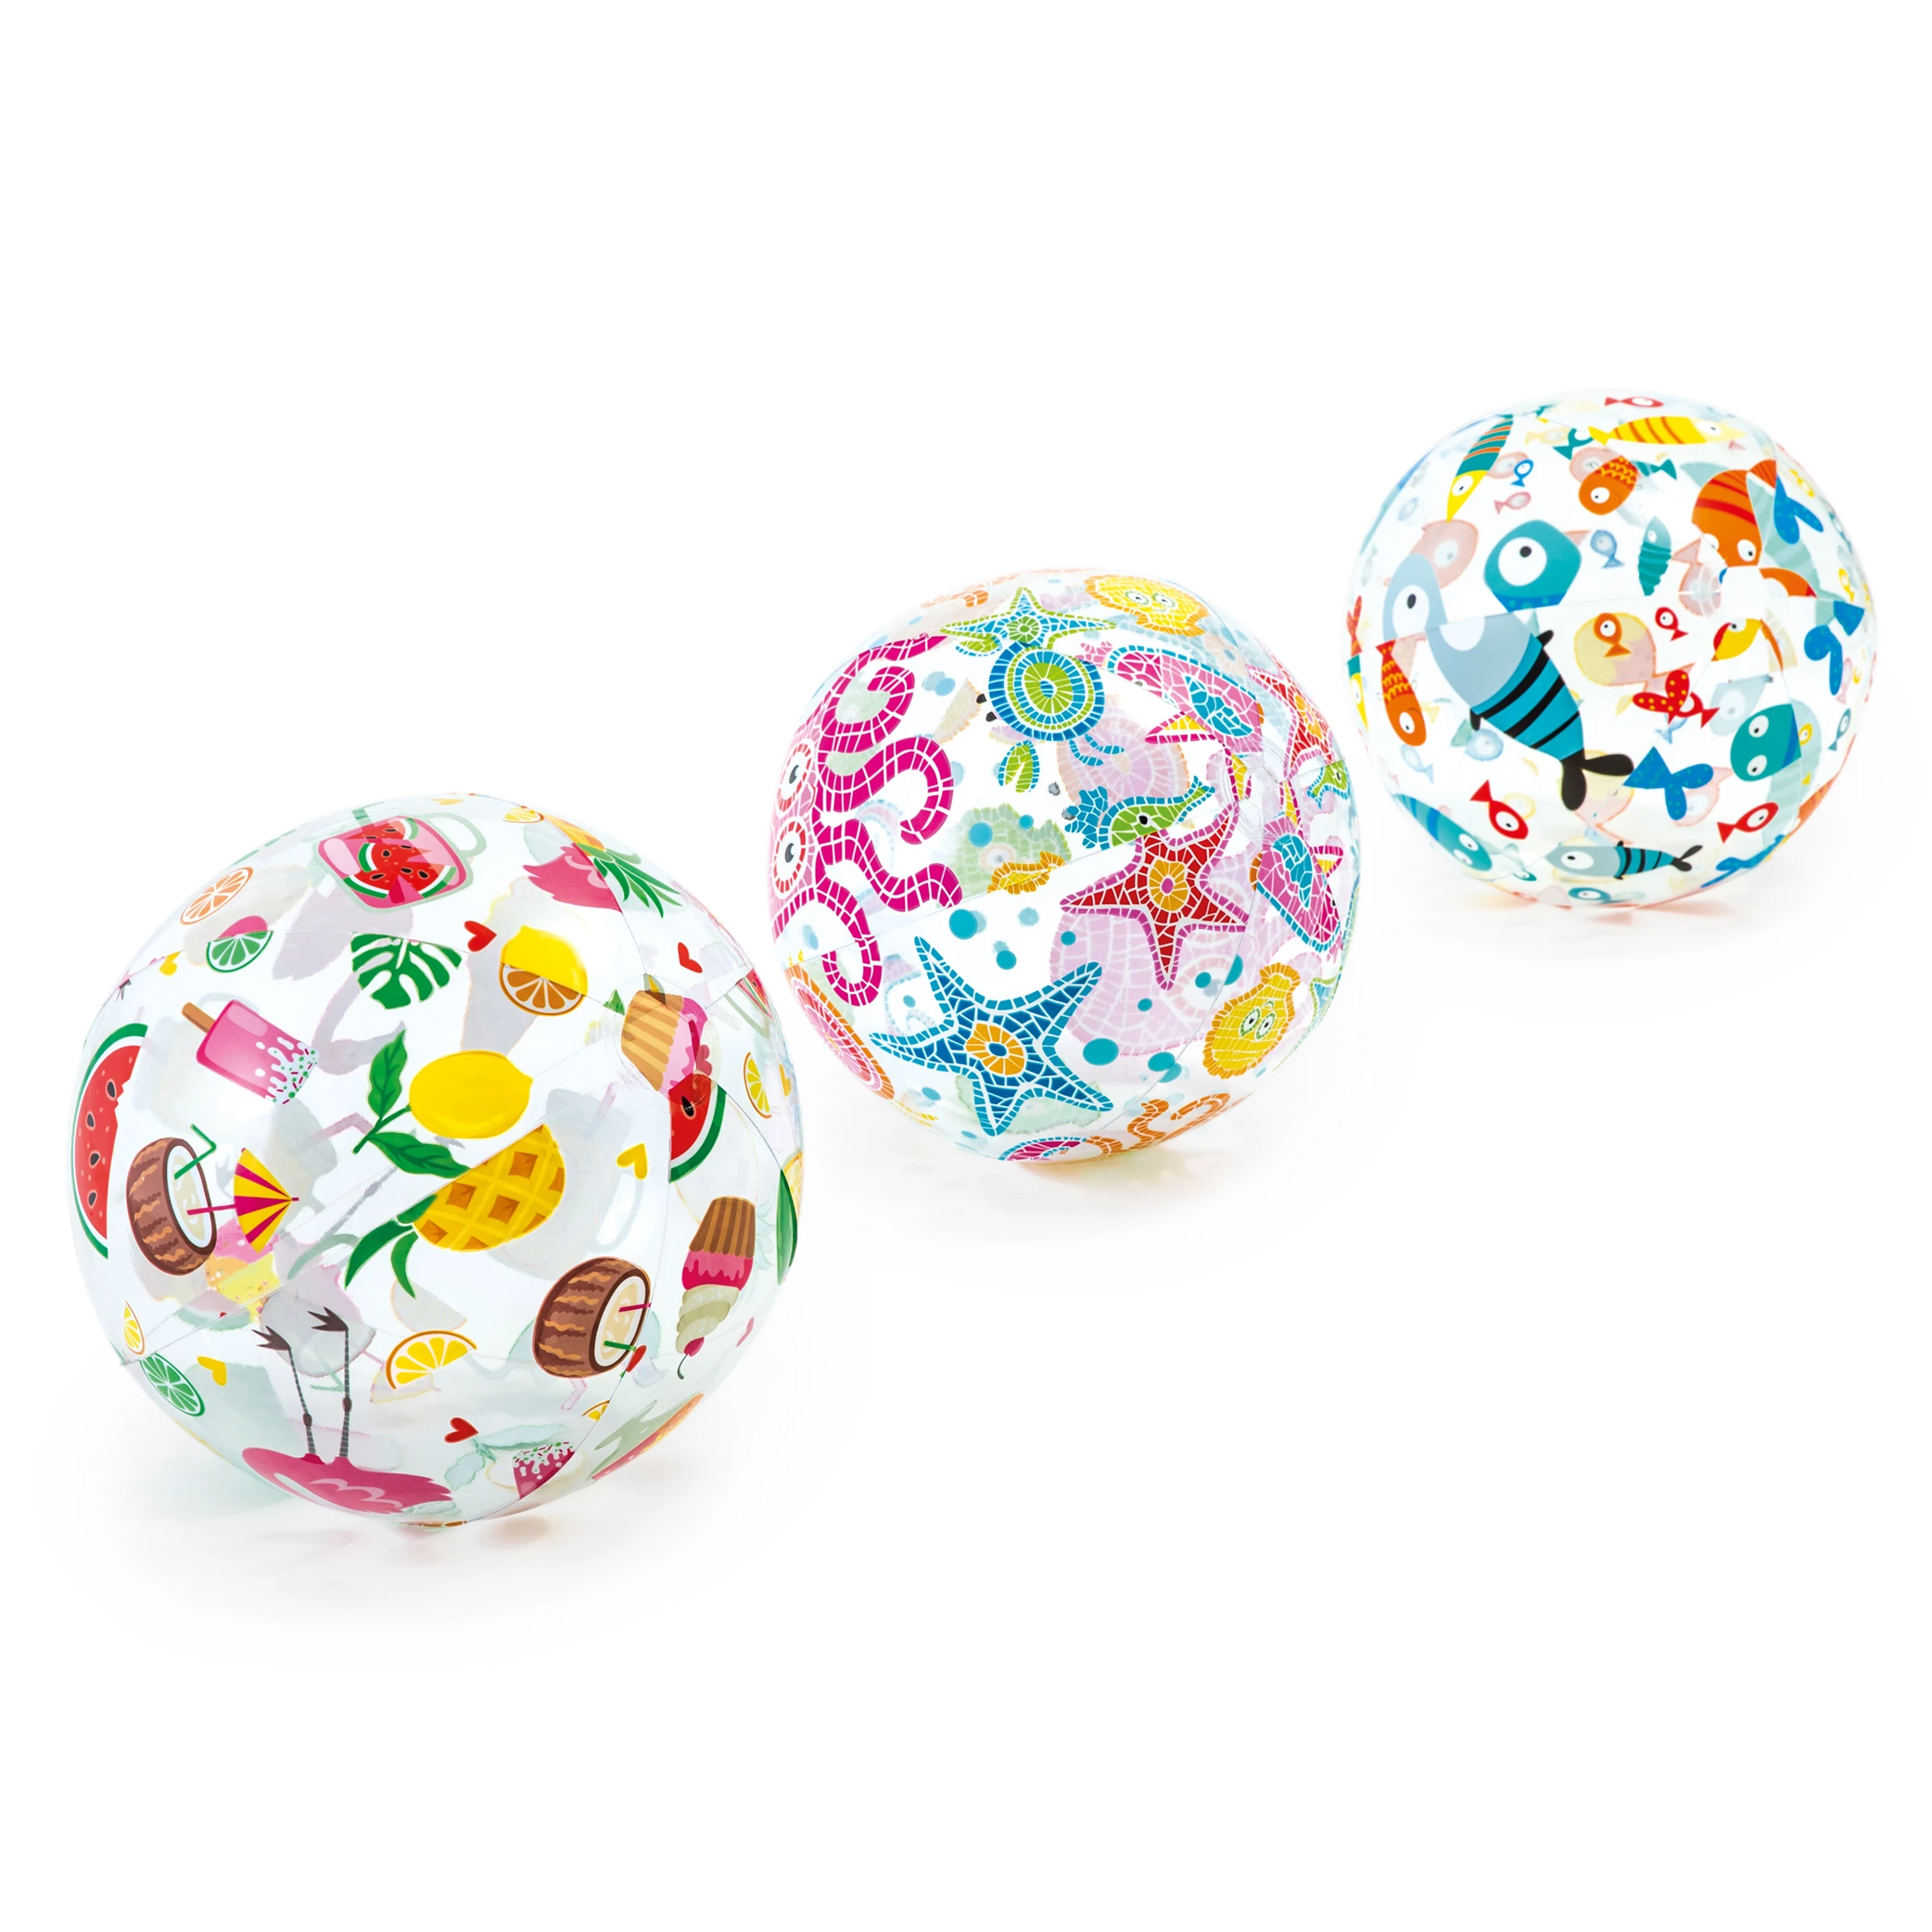 
INTEX 59040 WHOLESALE LIVELY PRINT PVC INFLATABLE BEACH BALL FOR KIDS  (60699102658)